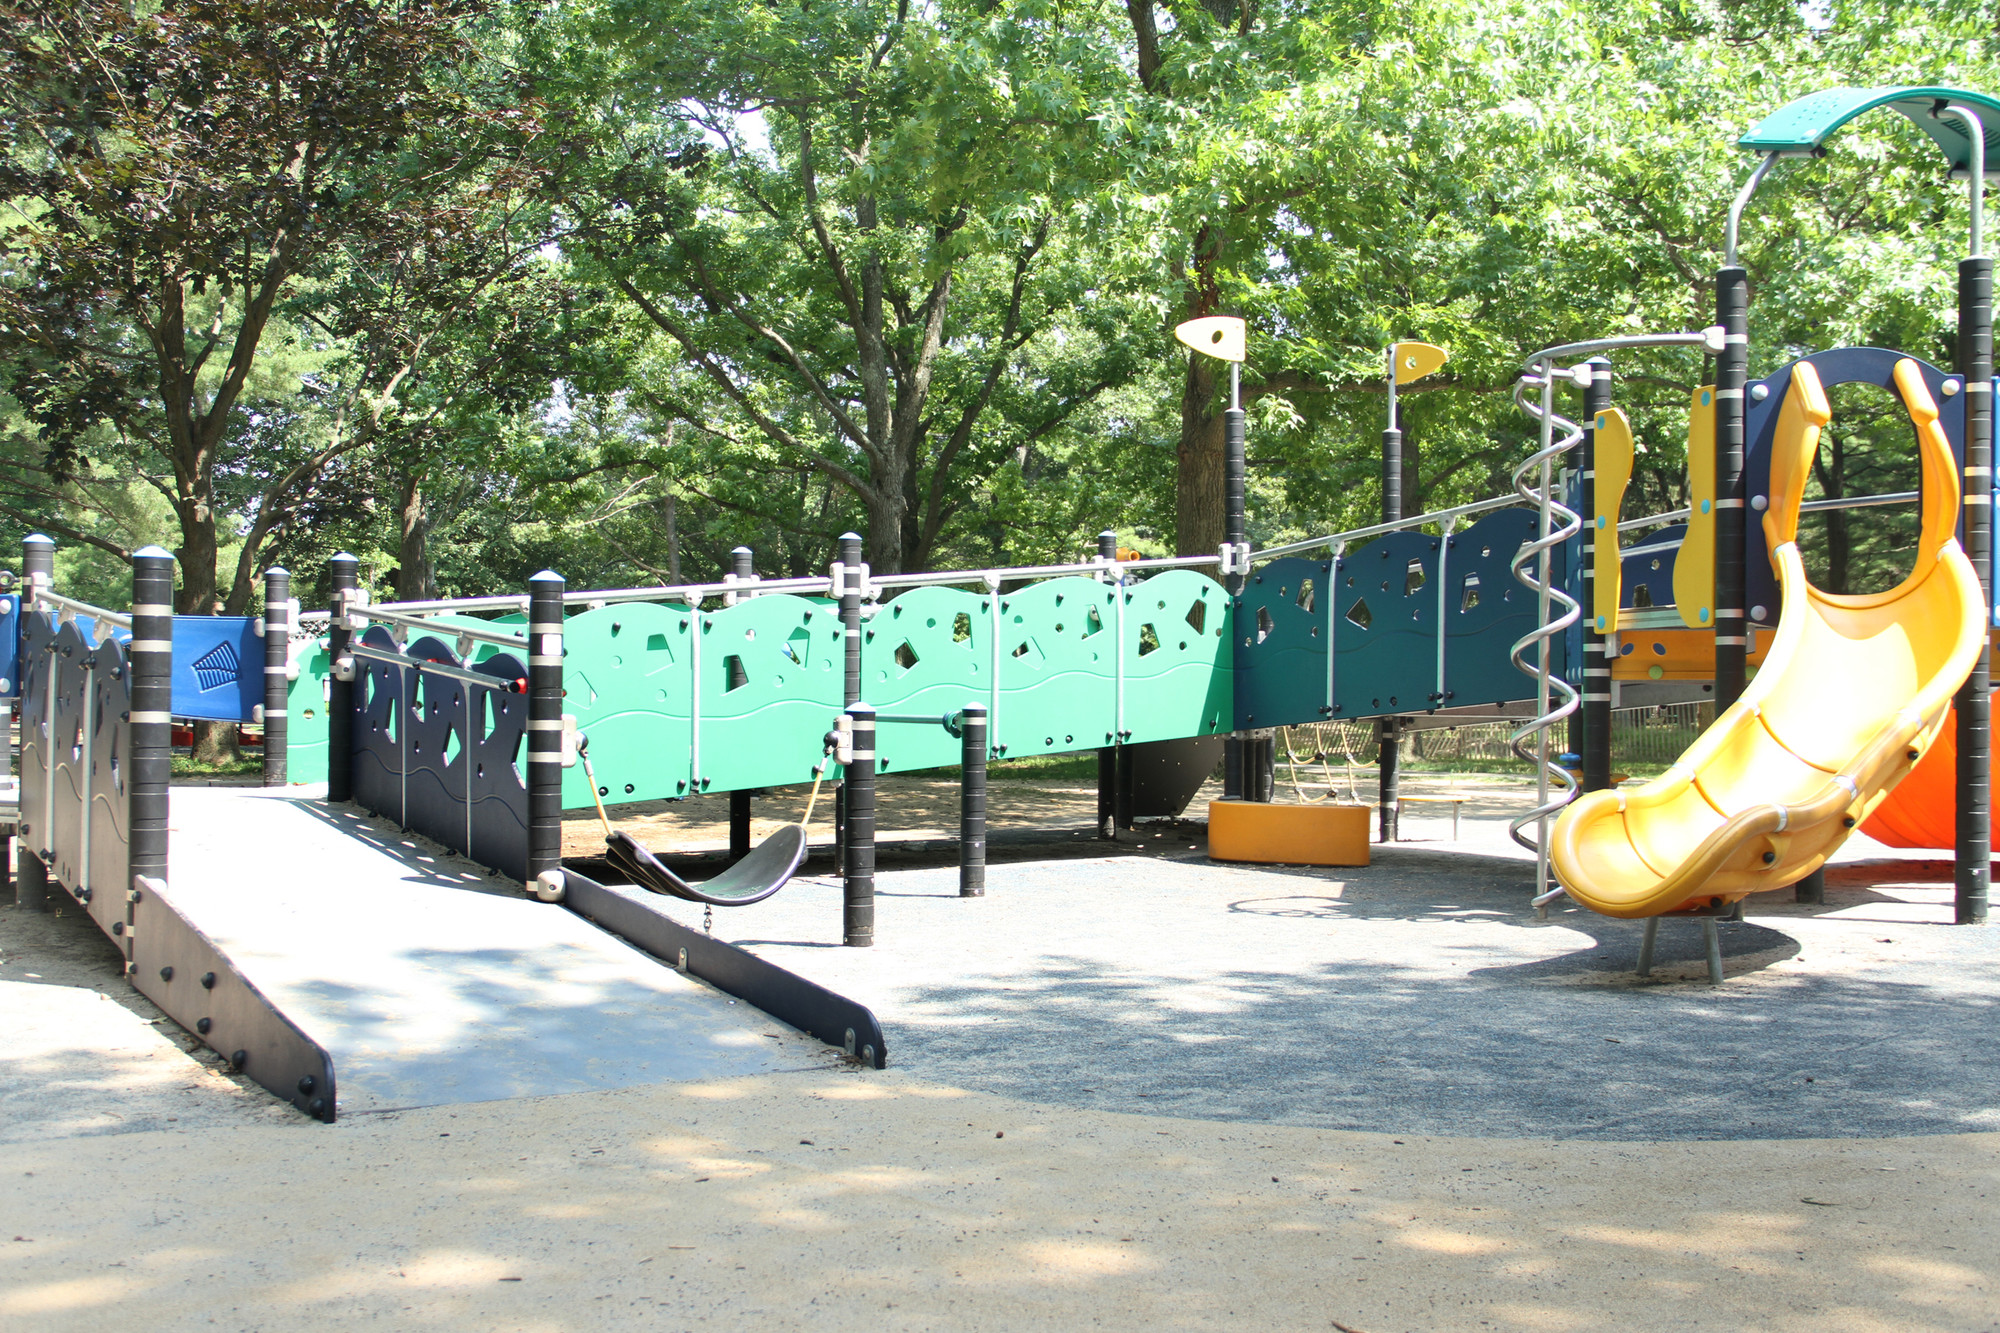 The playground features customized equipment that accommodates children who have special needs.